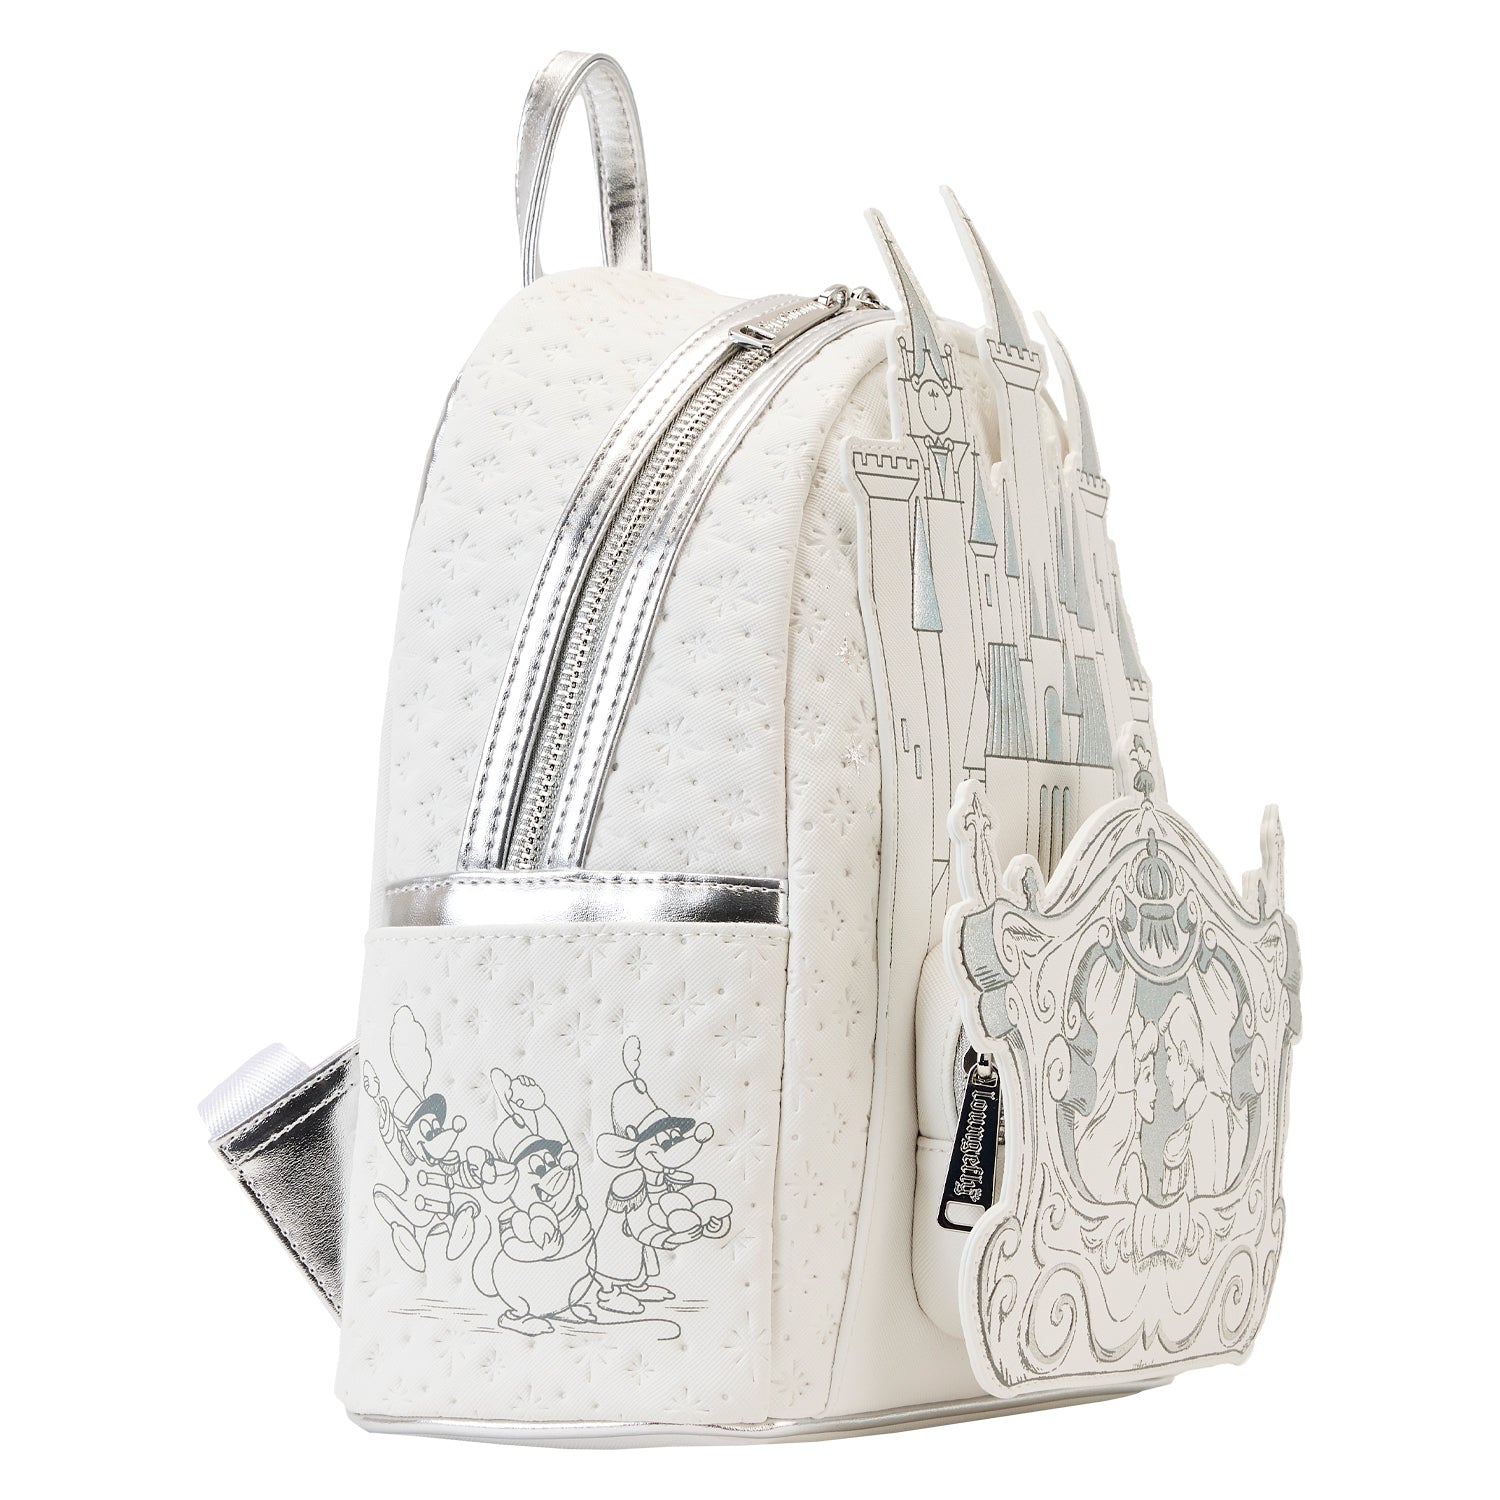 Disney Loungefly Mini Backpack - Snow White Evil Queen Throne